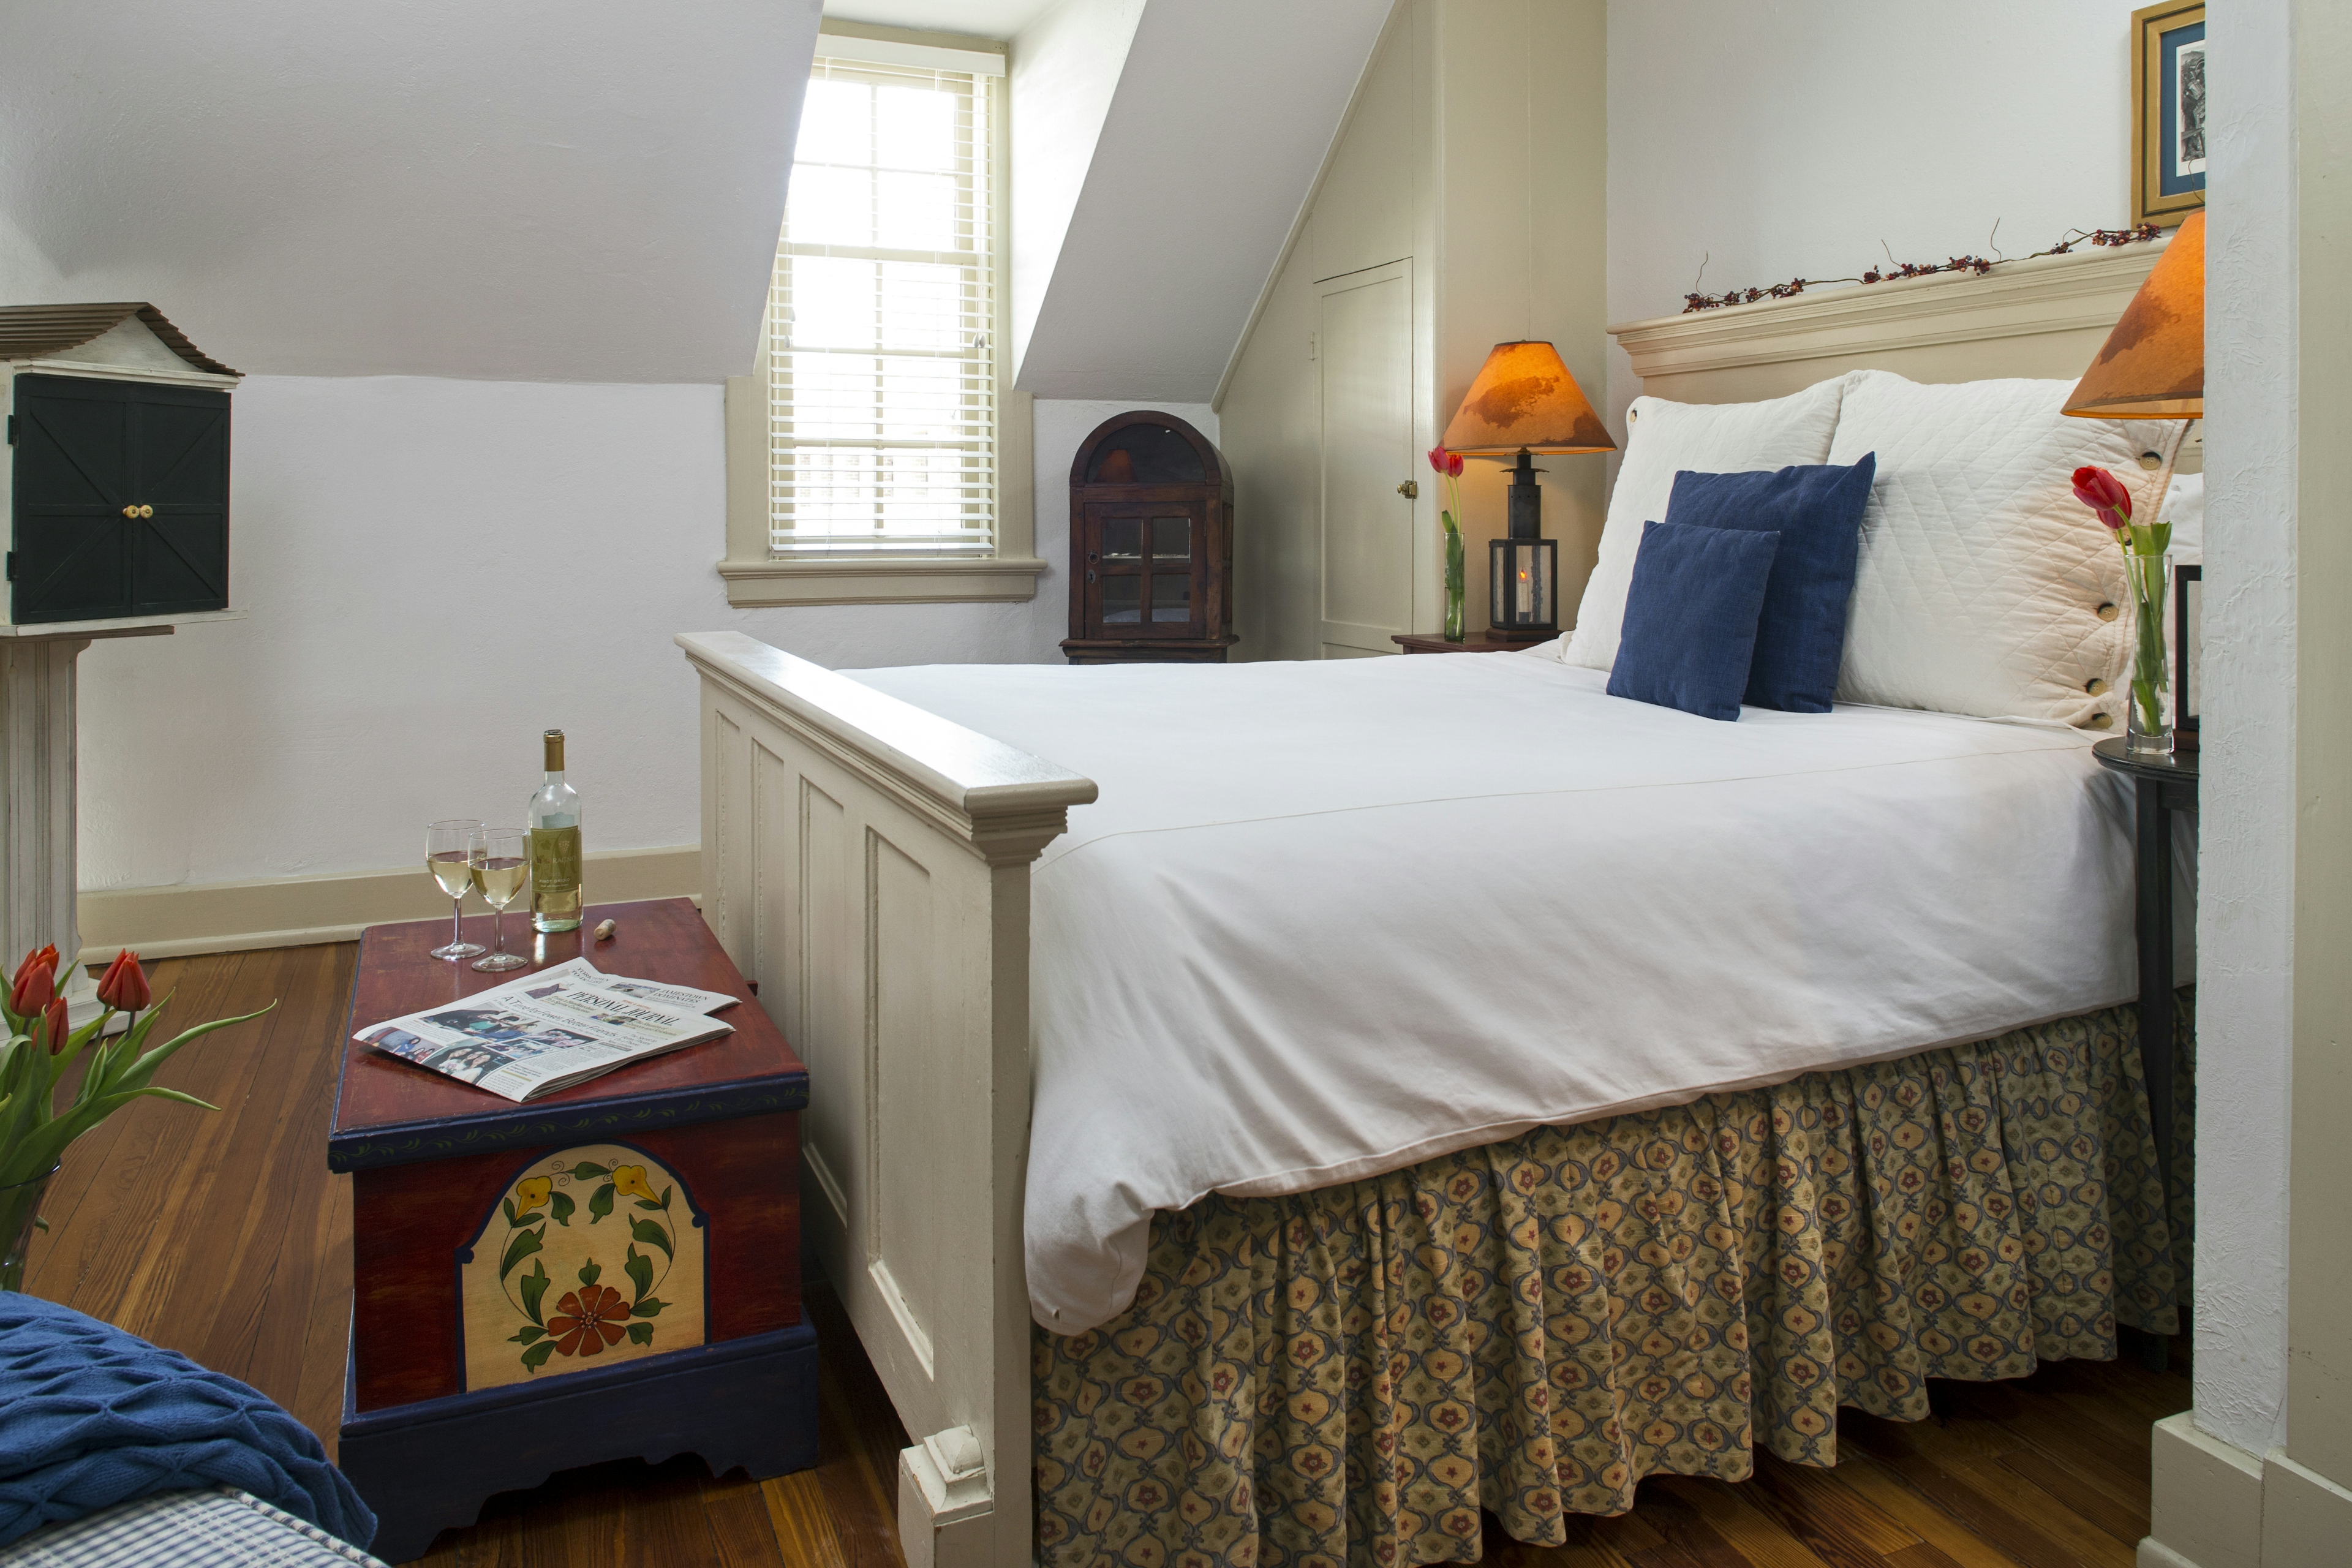 Inviting bed with headboard & footboard constructed of wooden doors, matching nightstands with lamps, and folk-art painted chest at foot of bed